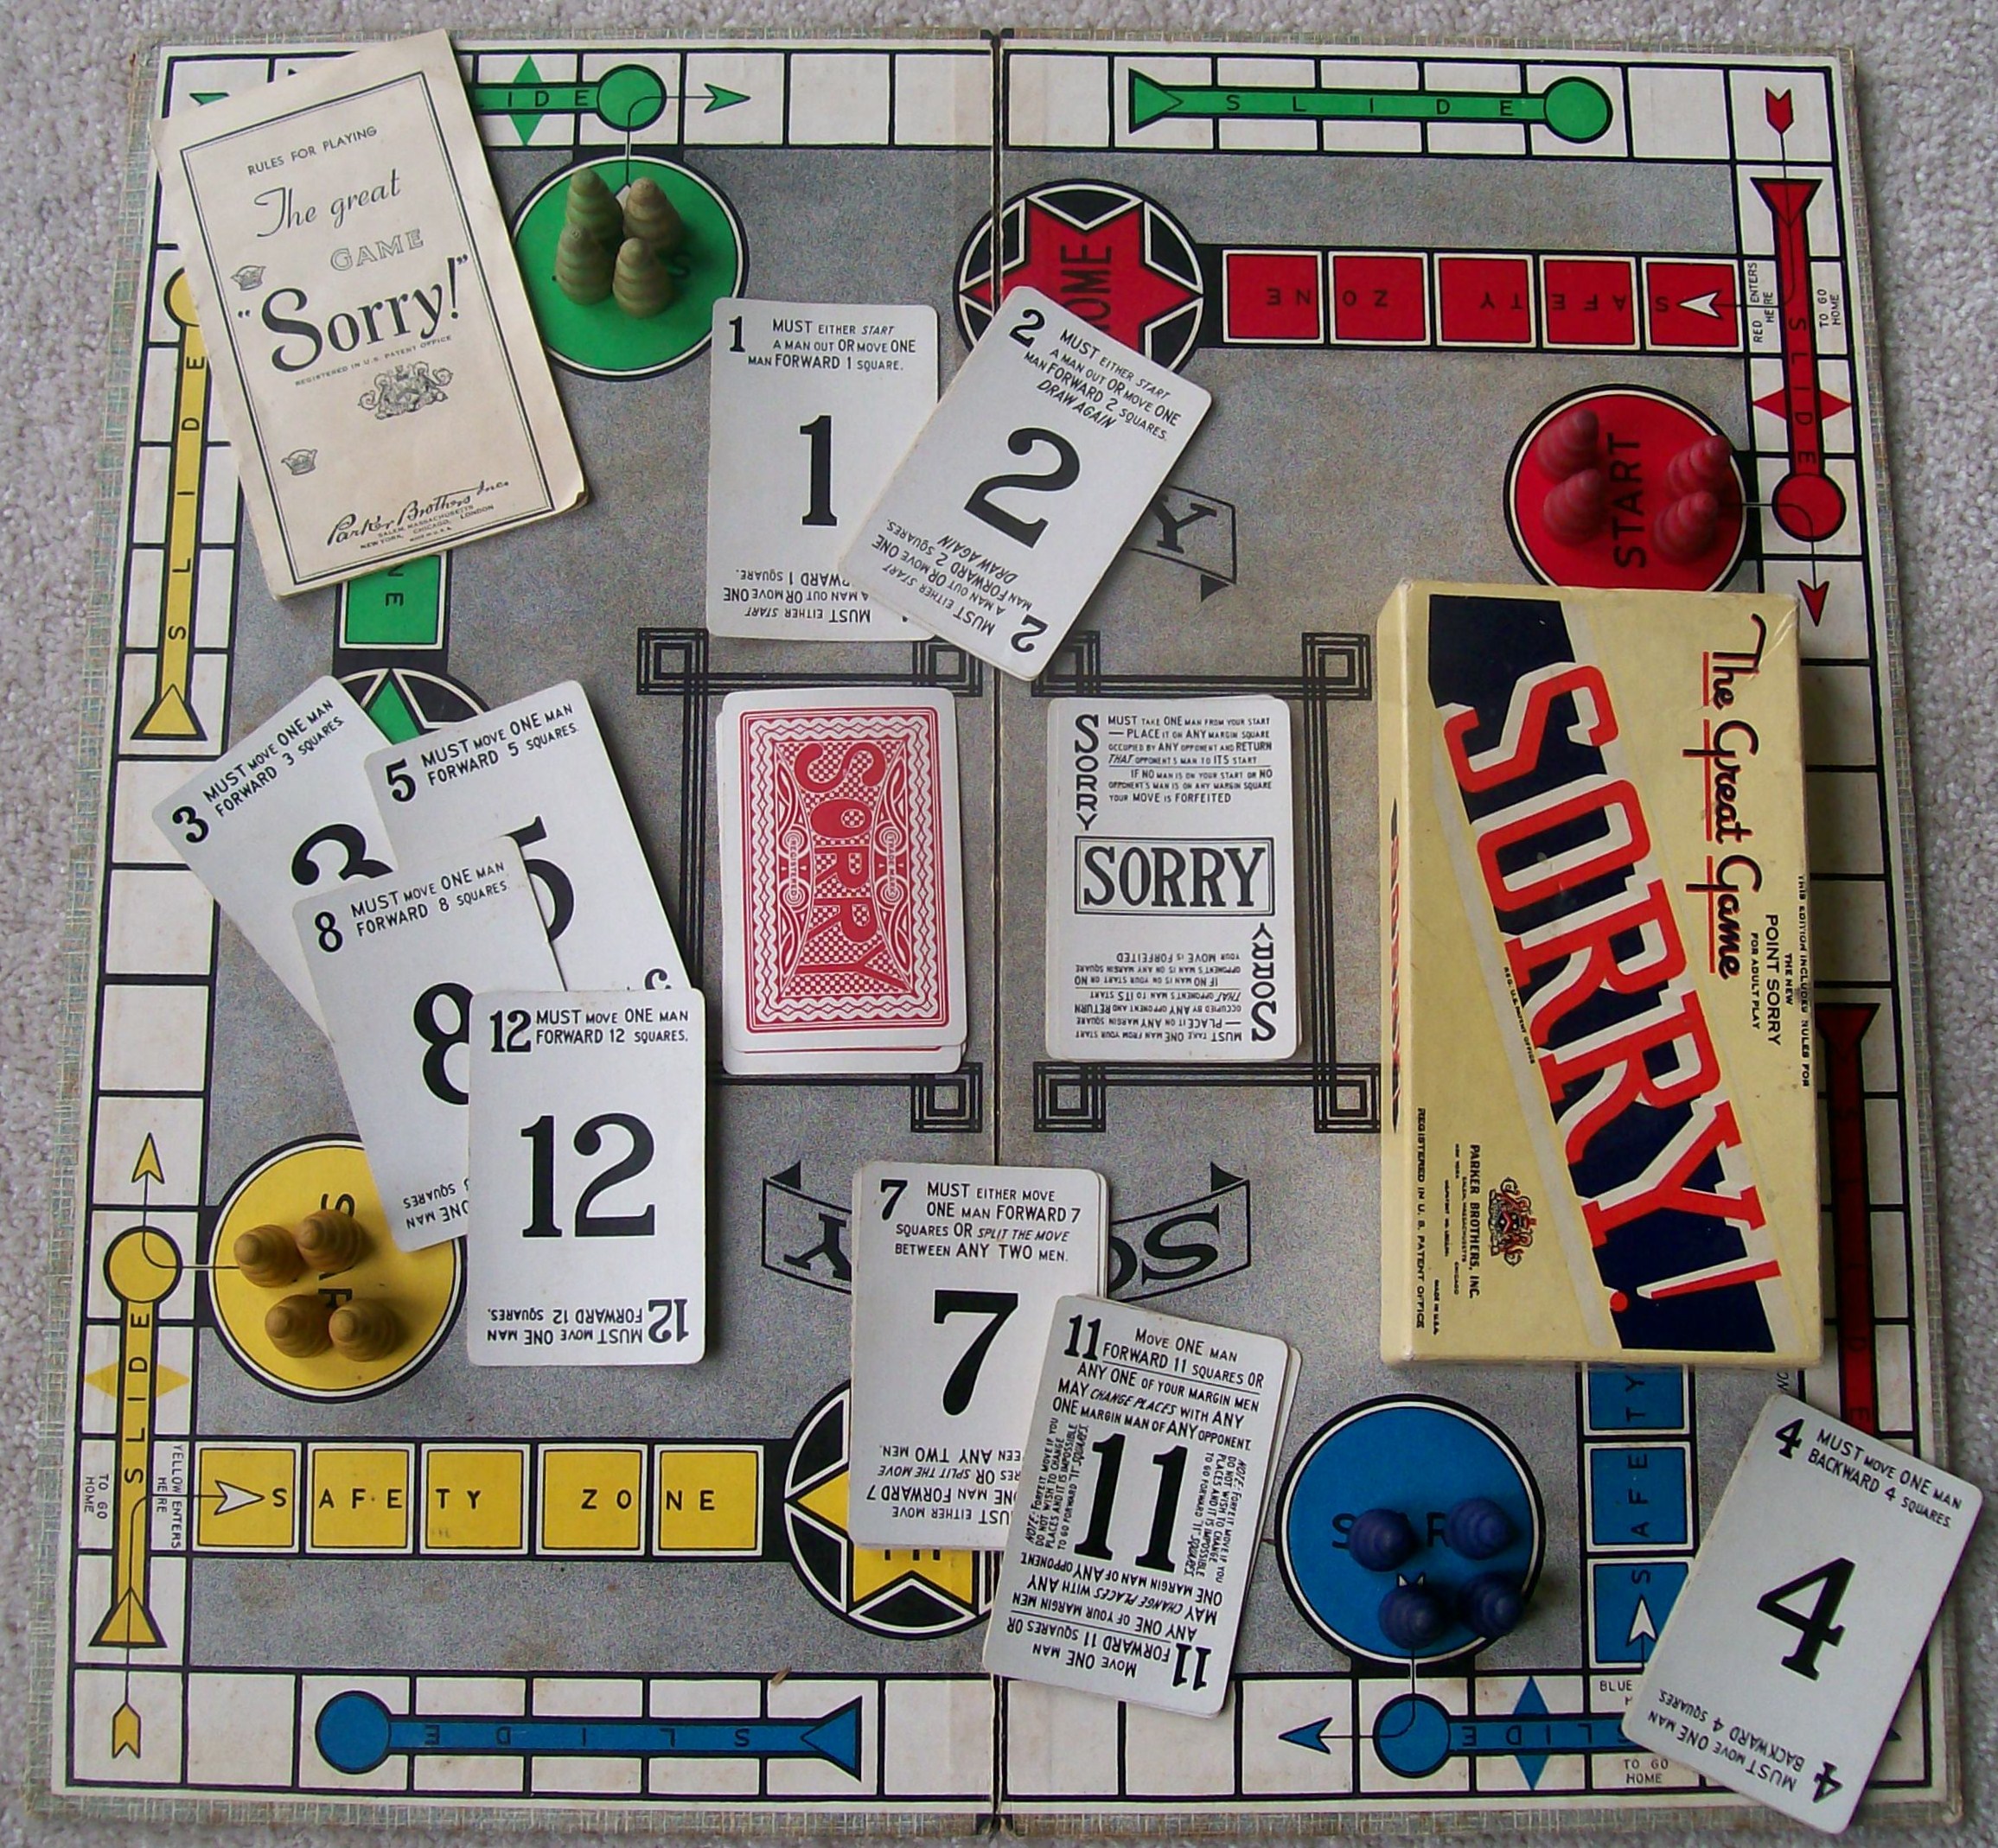 Classic Board Game of Sorry